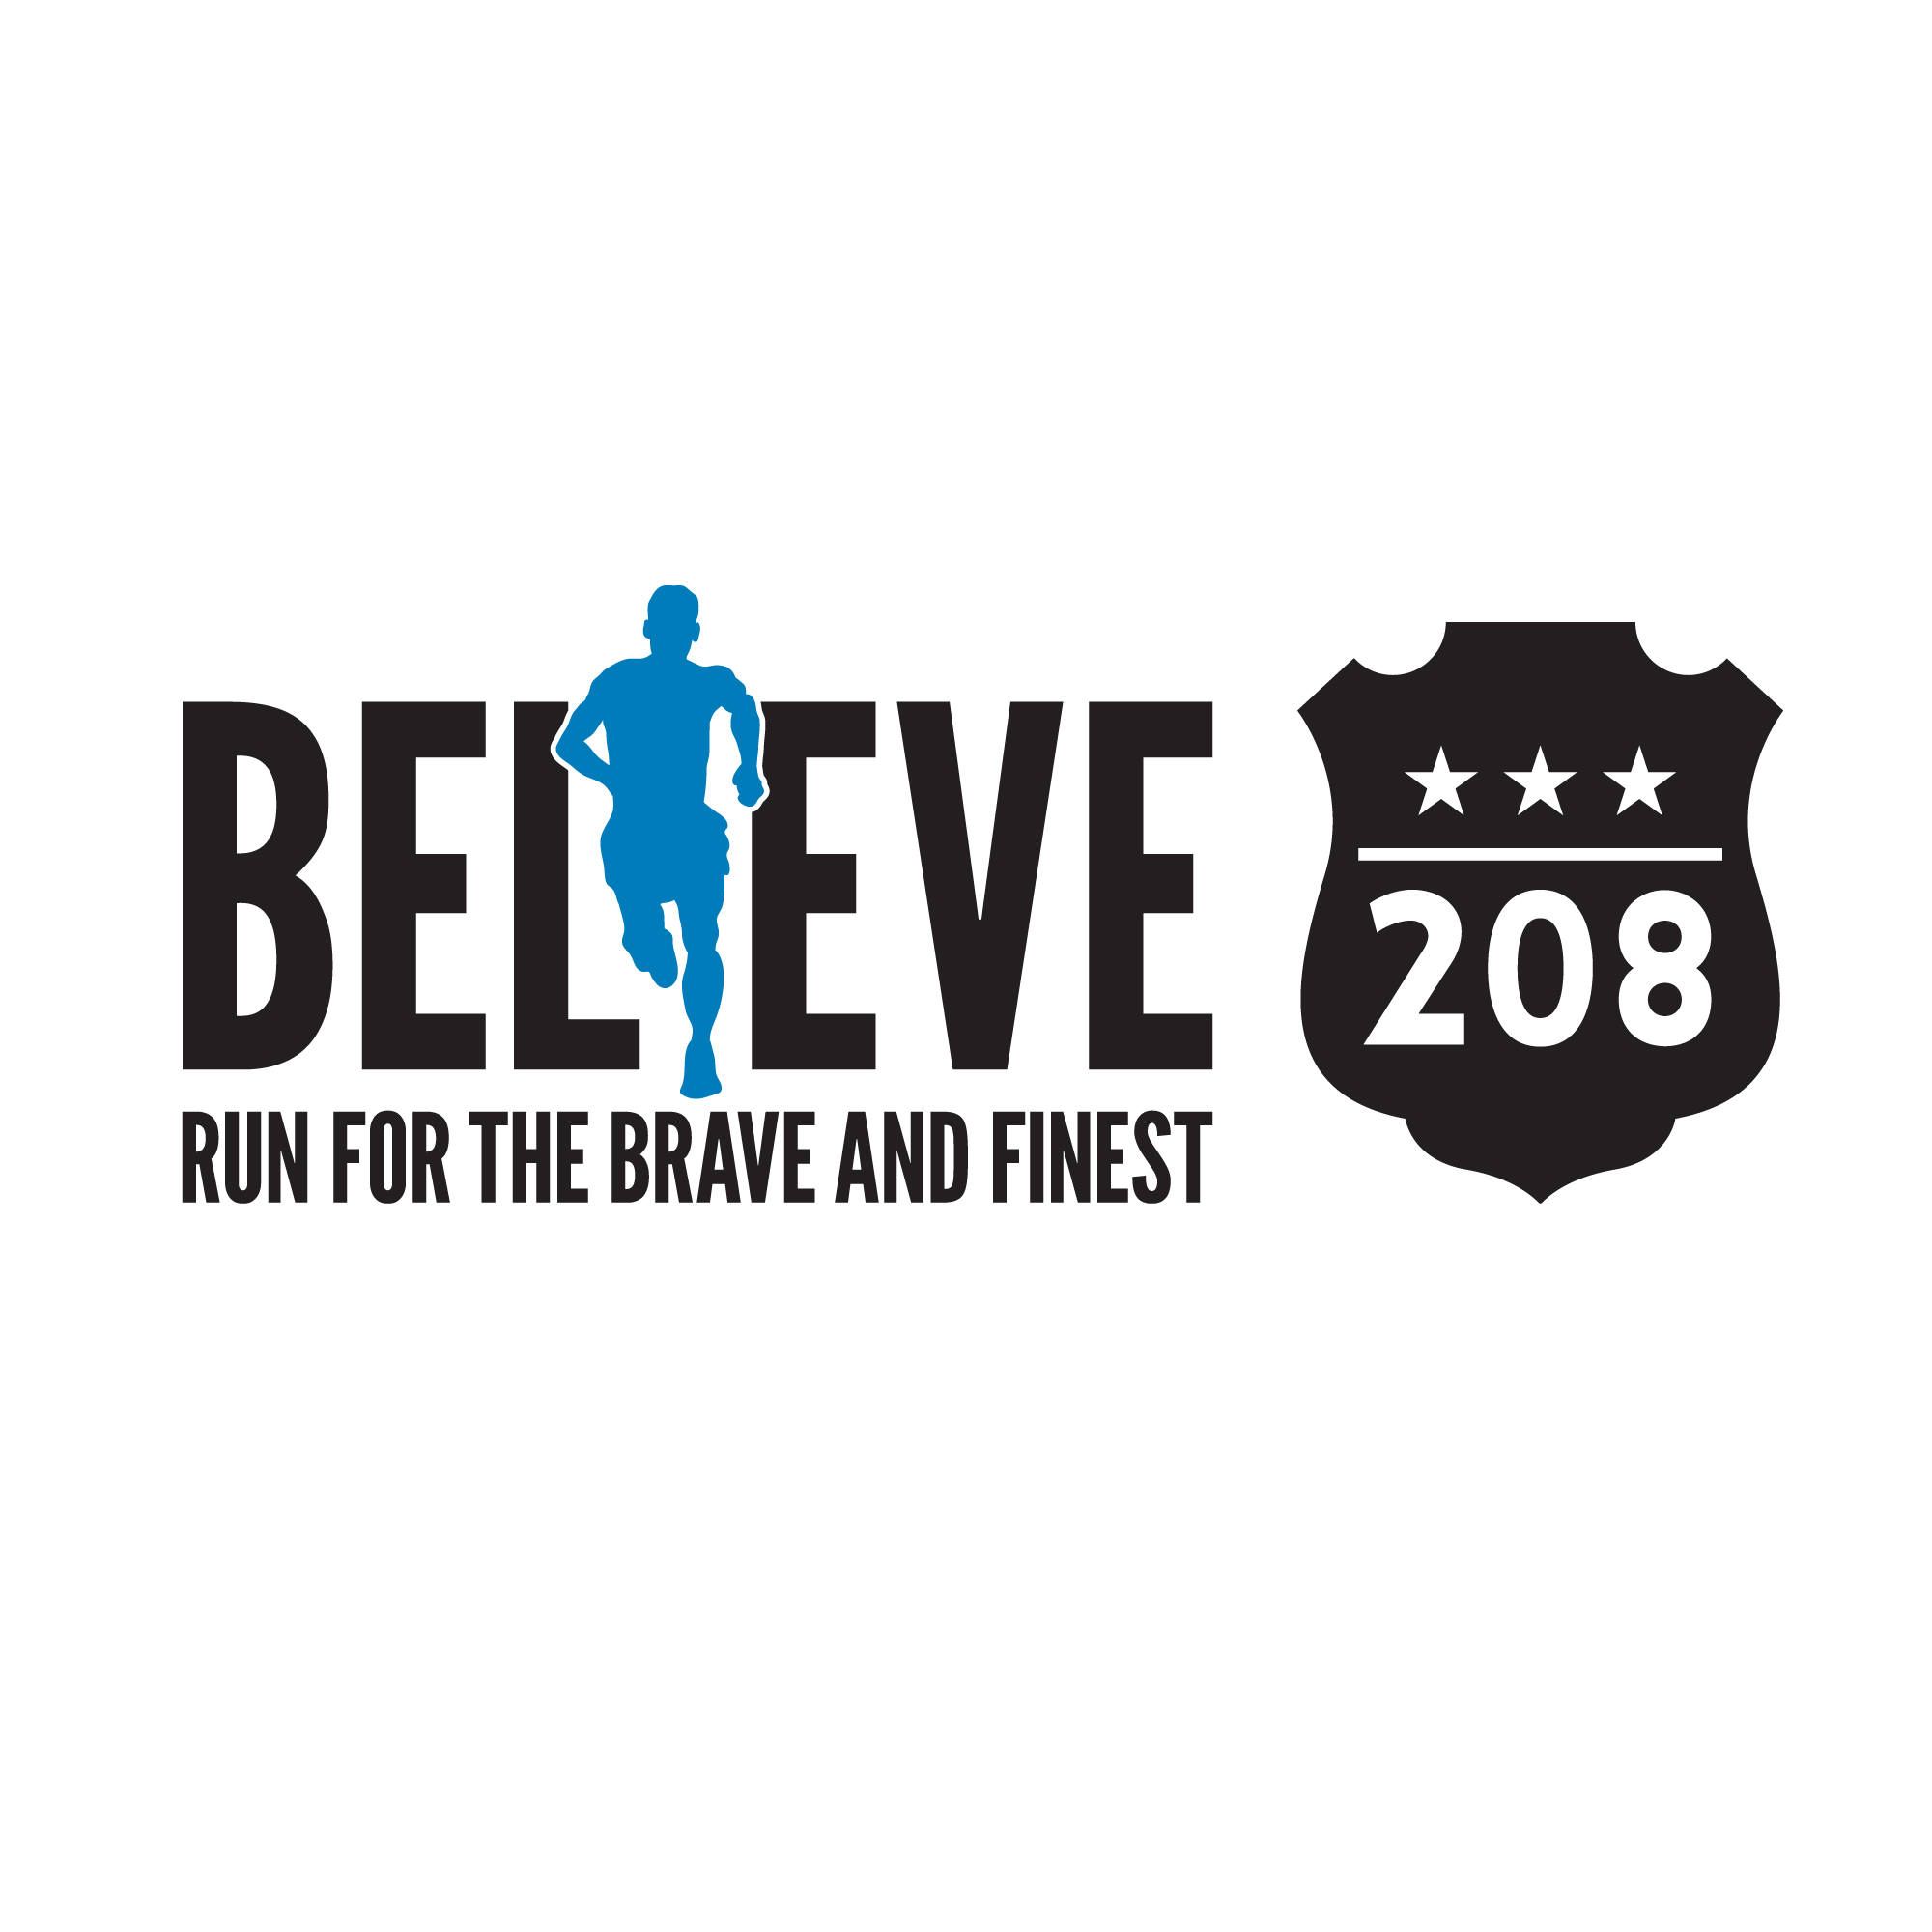 logo design for Believe 208: Run for the Brave and Finest charity 5k